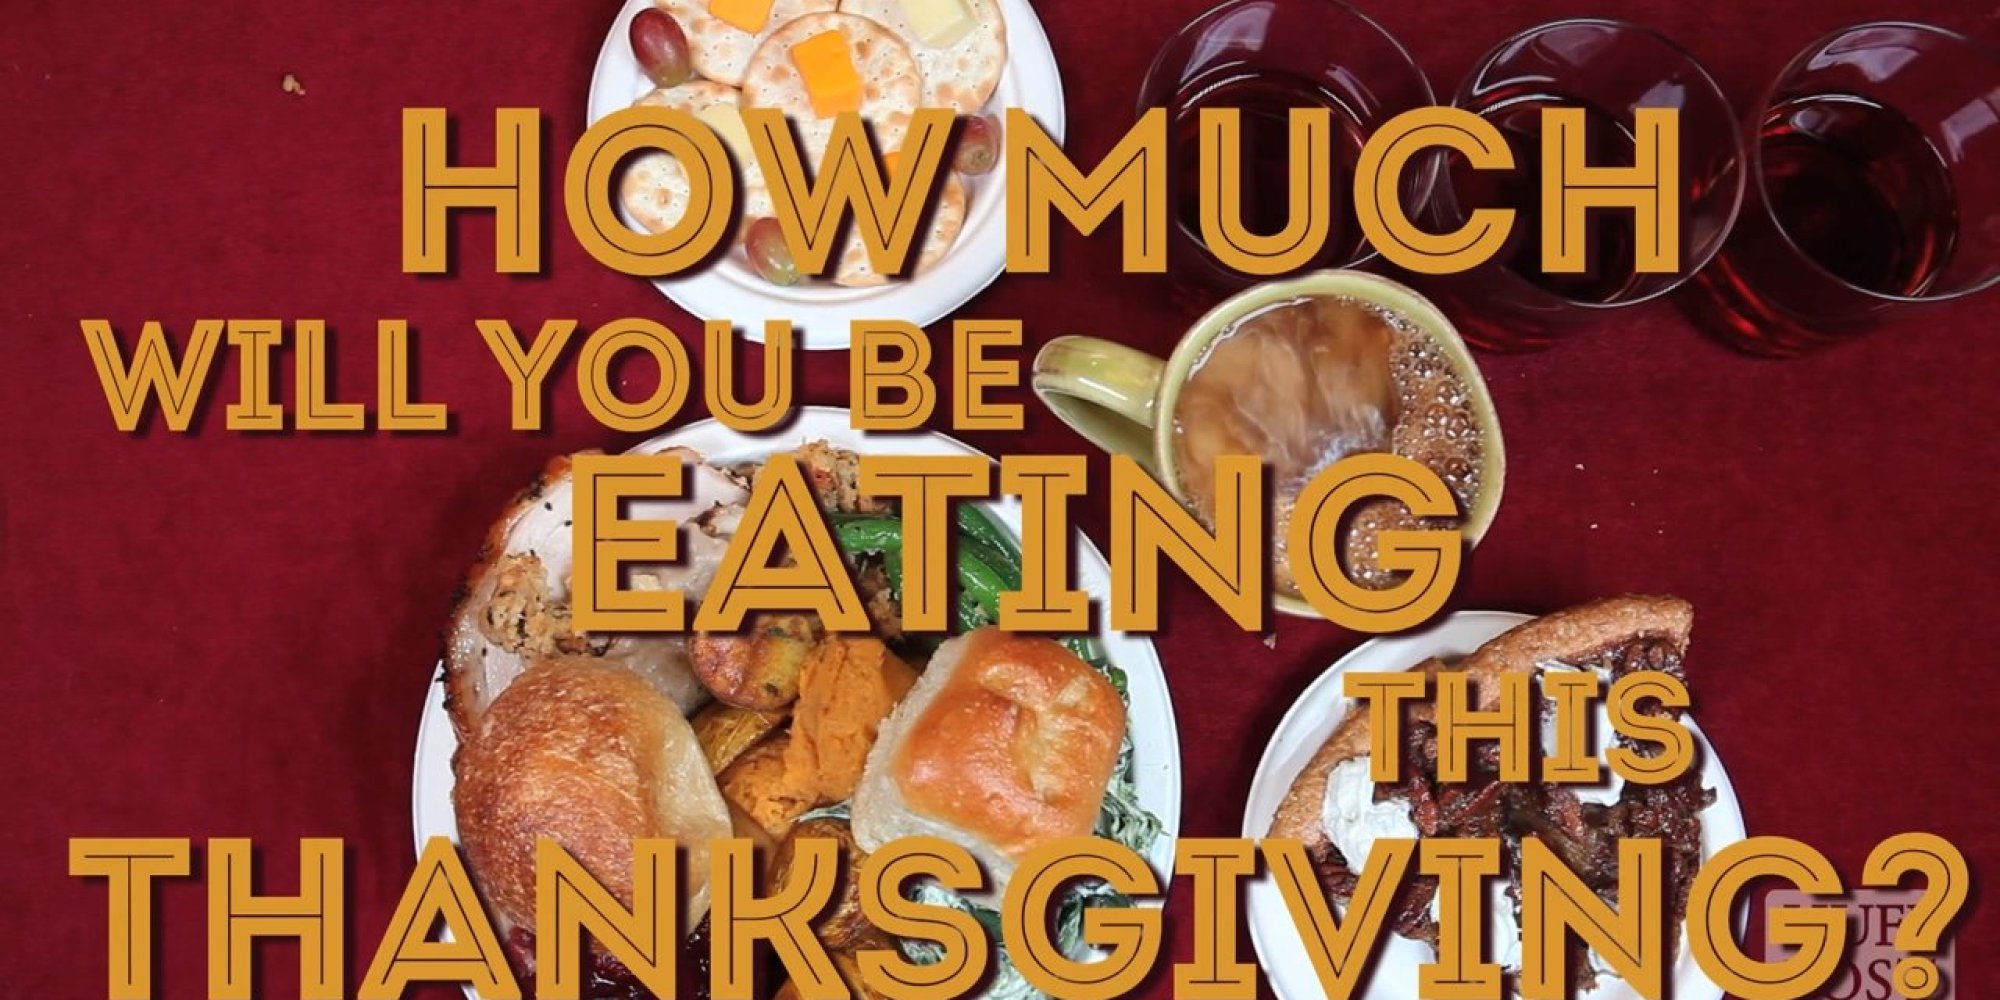 37 Super Tips for Healthy Eating this Thanksgiving